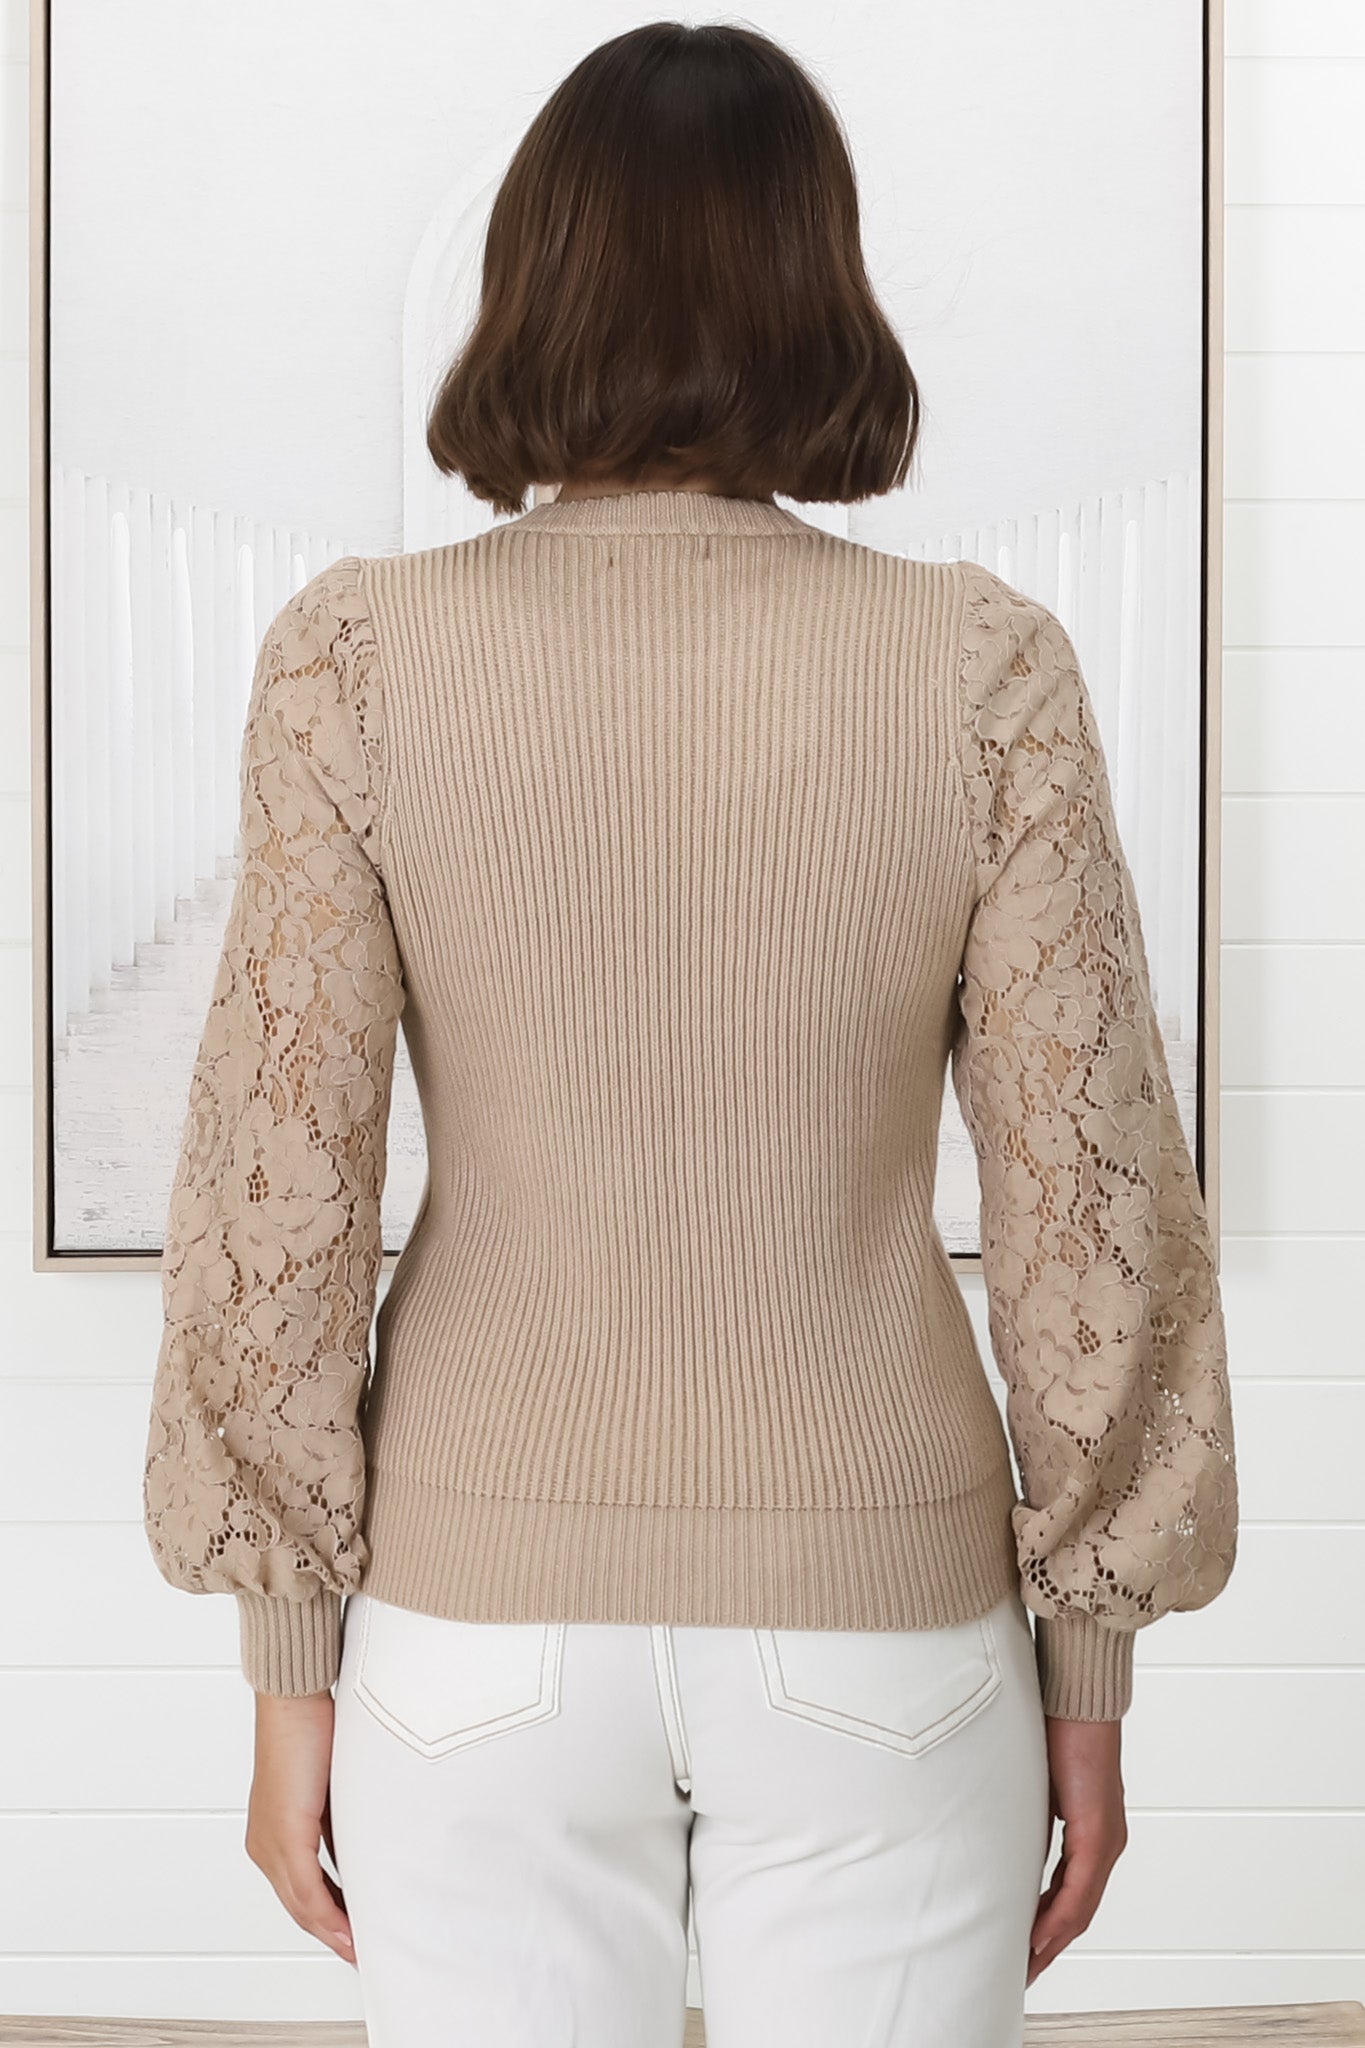 Larna Jumper - Knit Jumper with Lace Sleeves in Camel